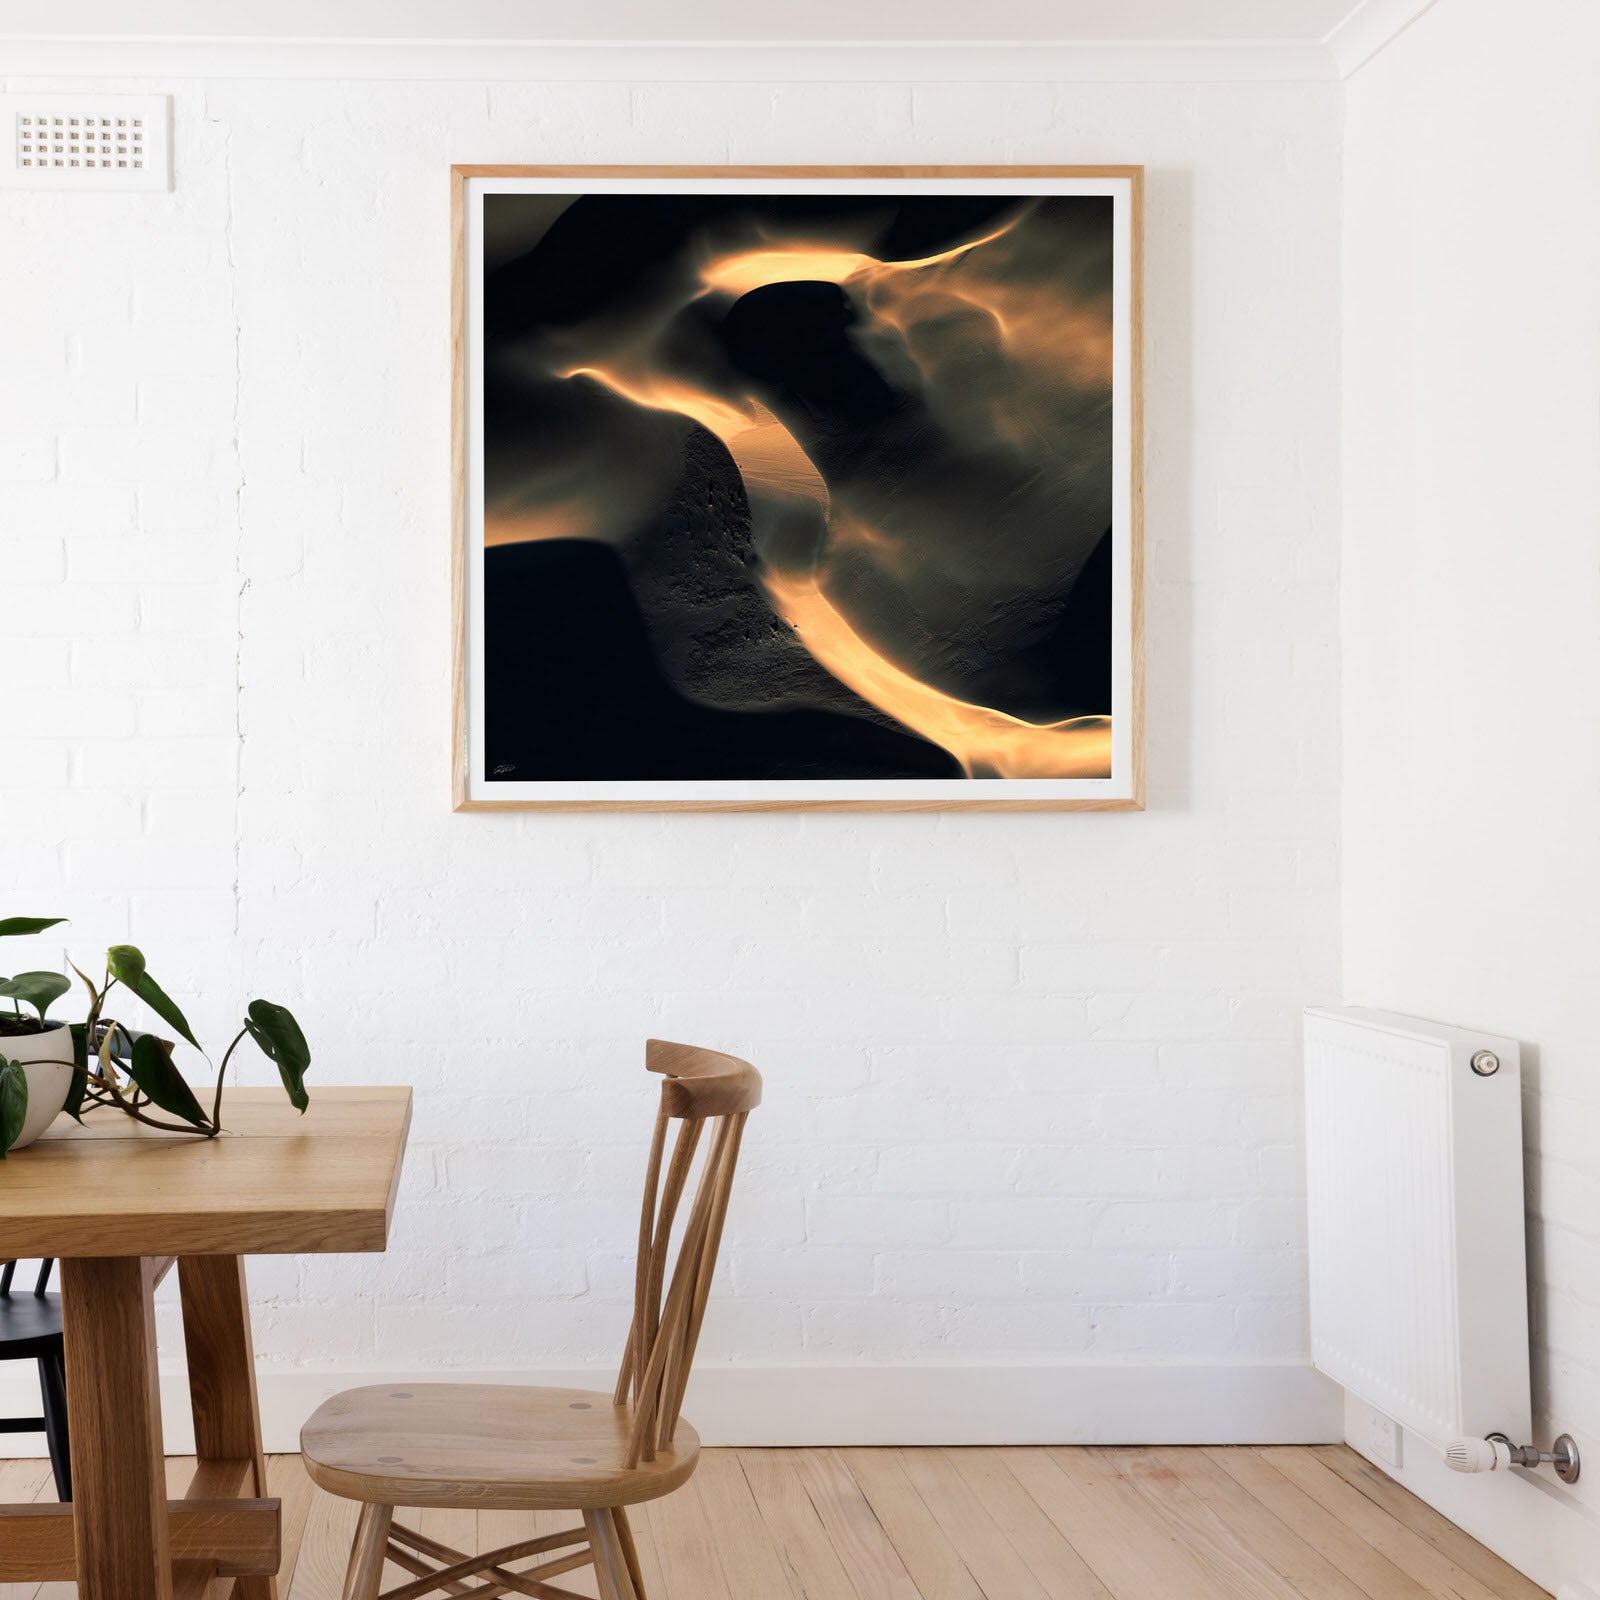 Black and gold abstract square wall art of sand dunes